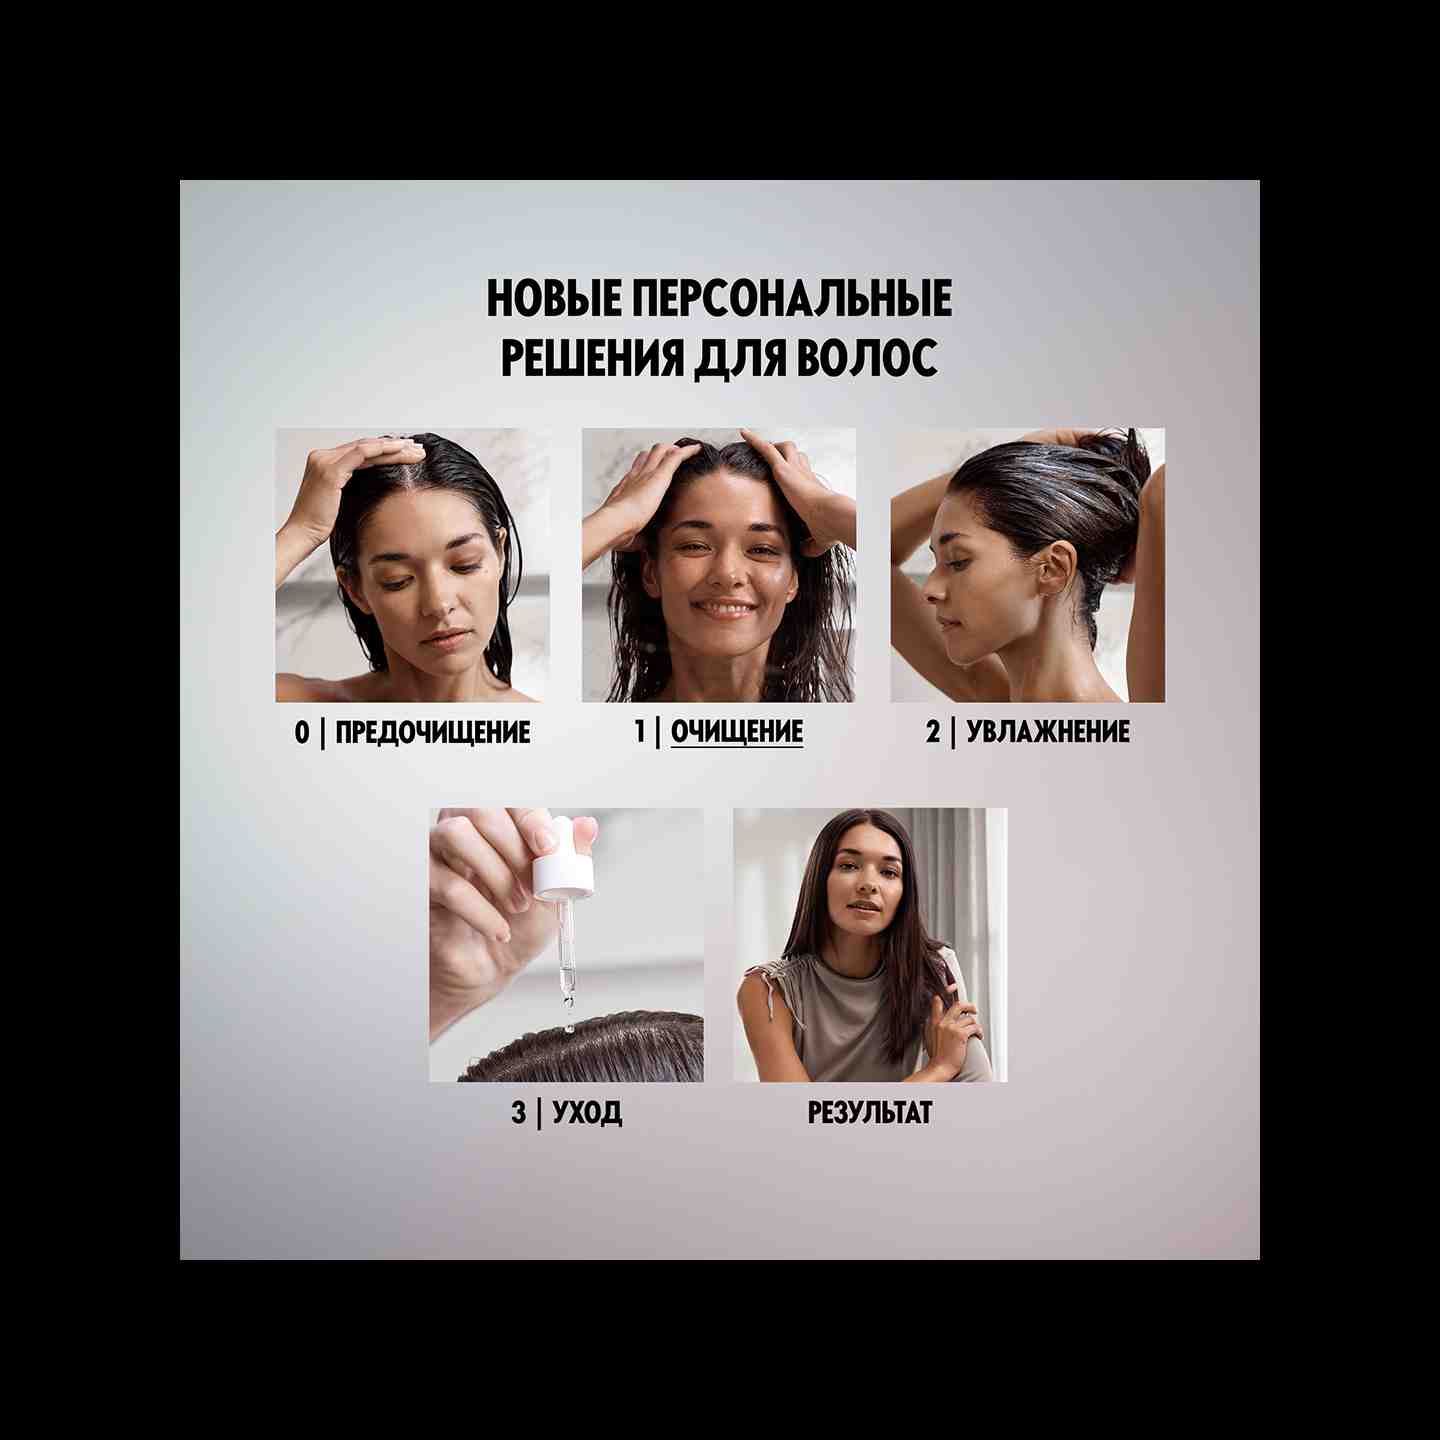 https://media-cdn.oriflame.com/productImage?externalMediaId=product-management-media%2fProducts%2f44950%2fAZ%2f44950_7.png&id=17871166&version=1